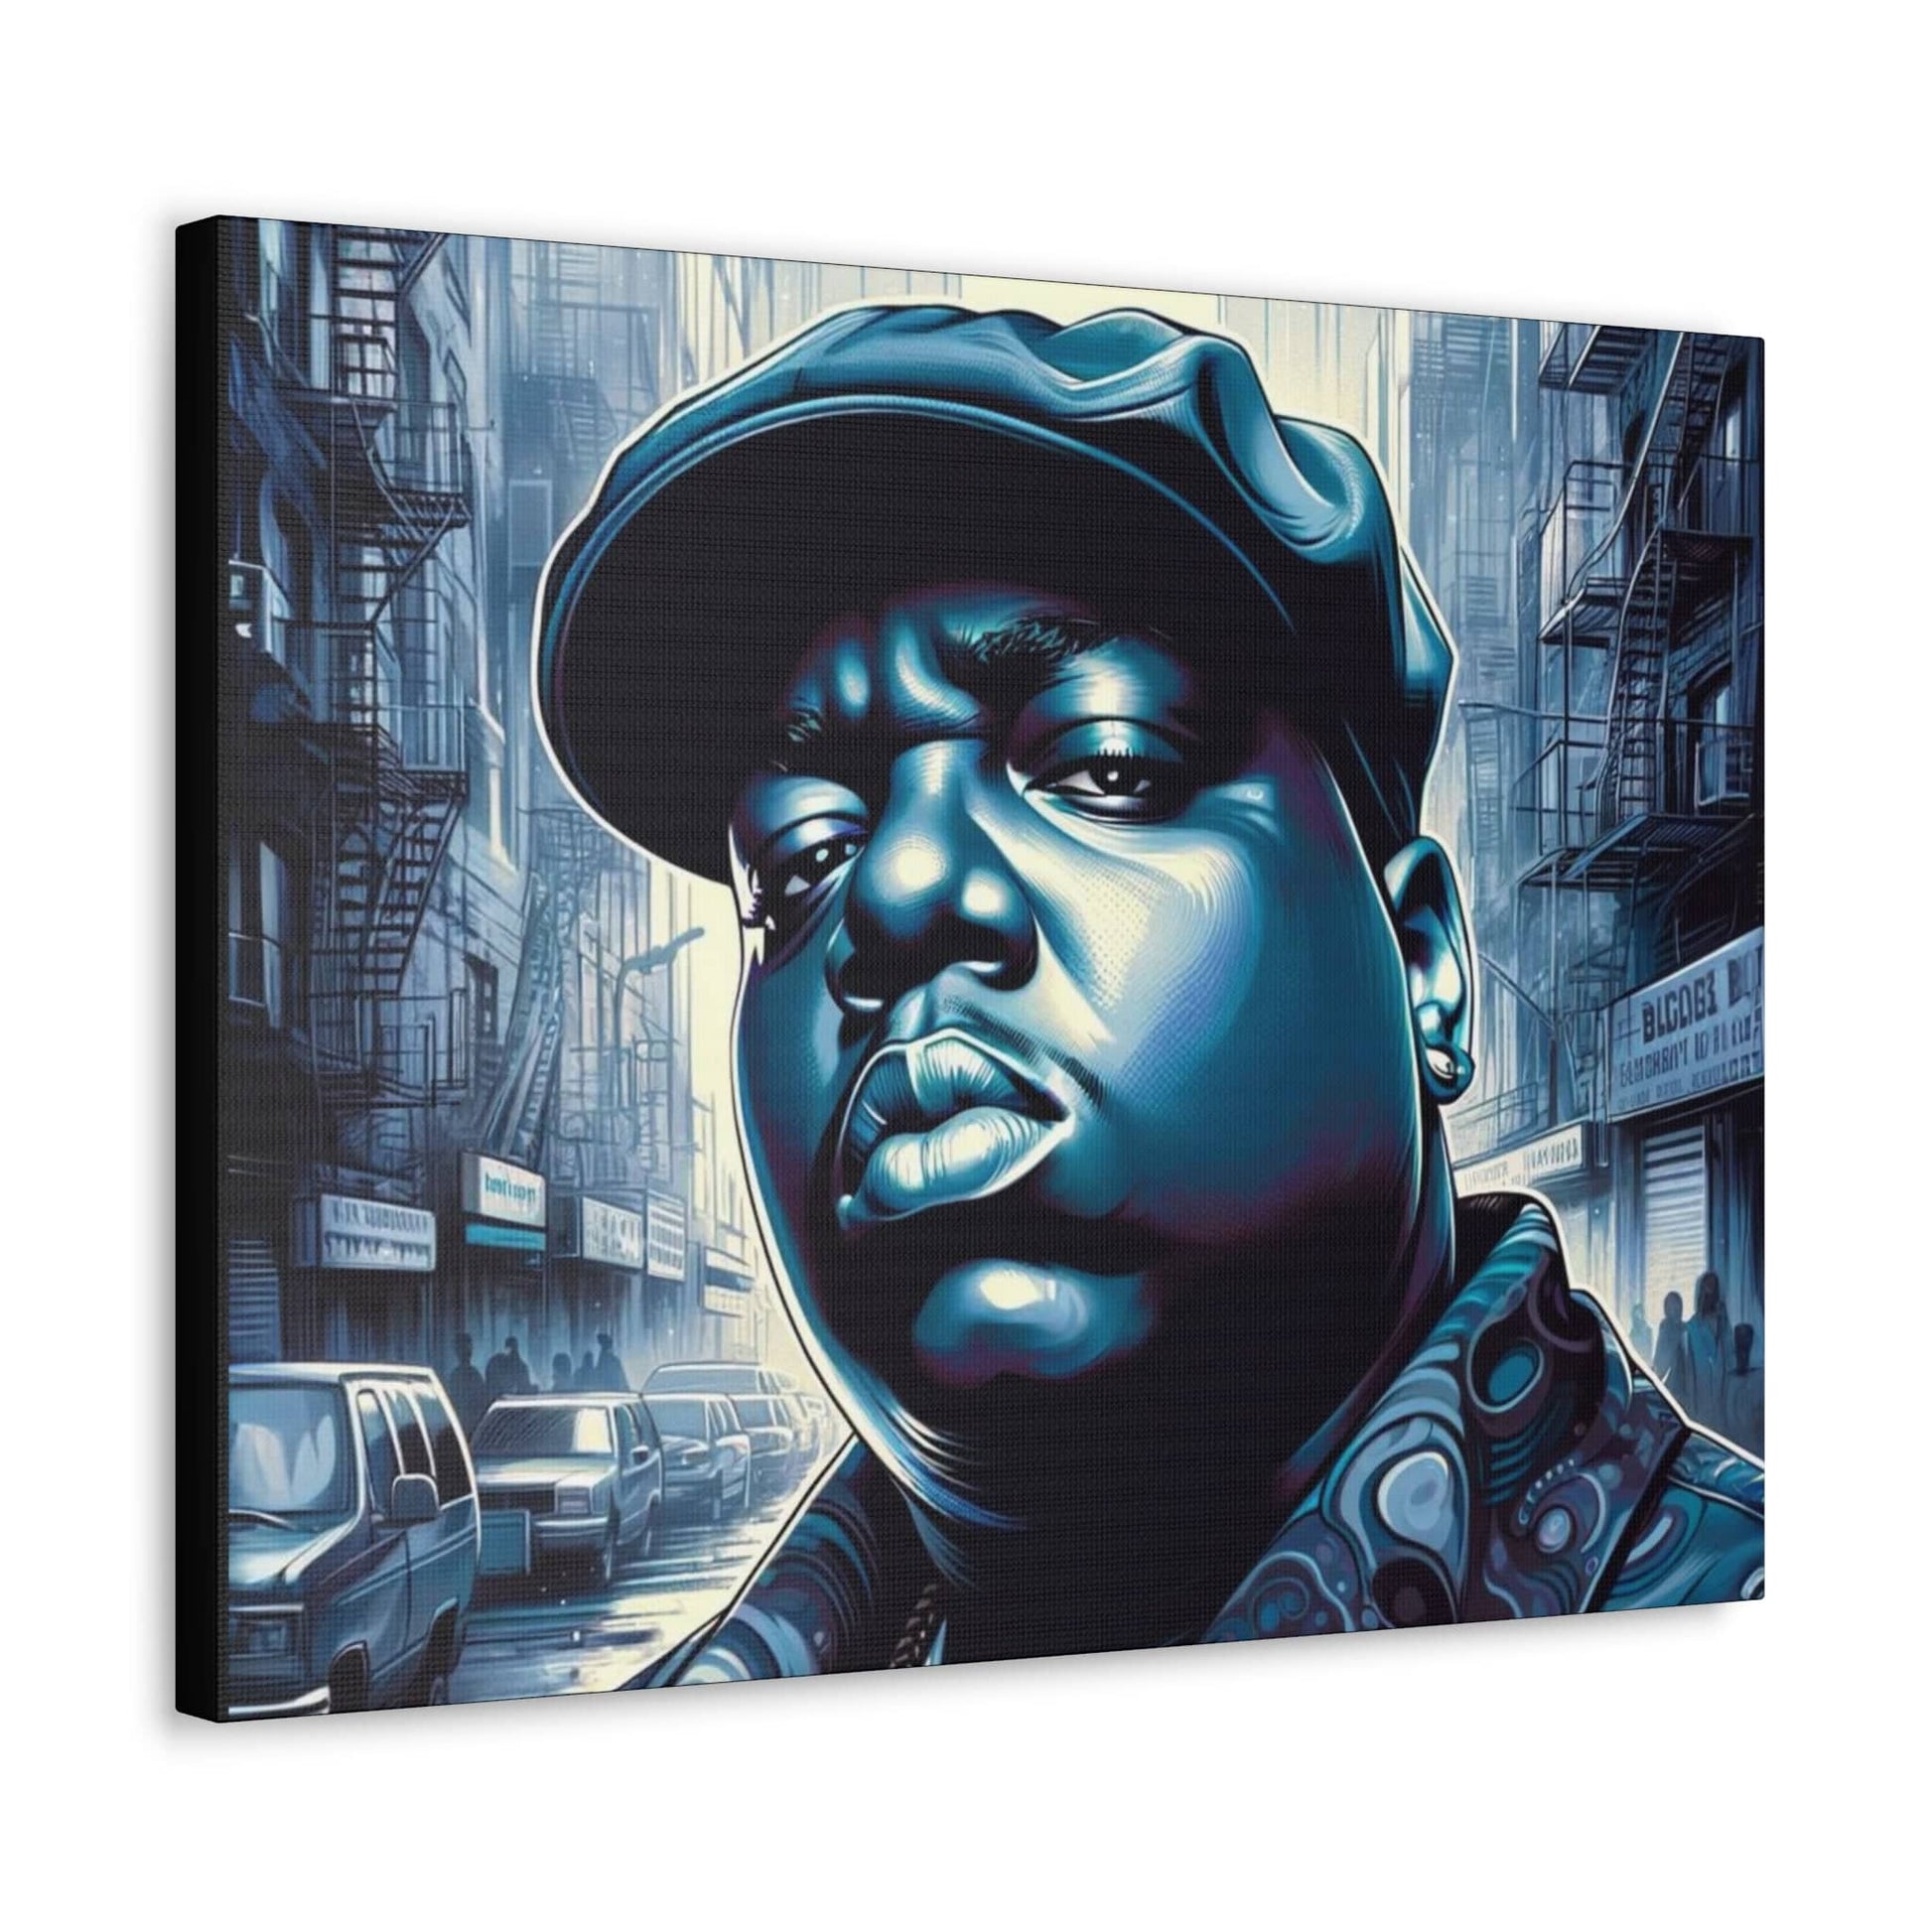 Brooklyn's Finest: The Notorious Canvas Canvas Printify   